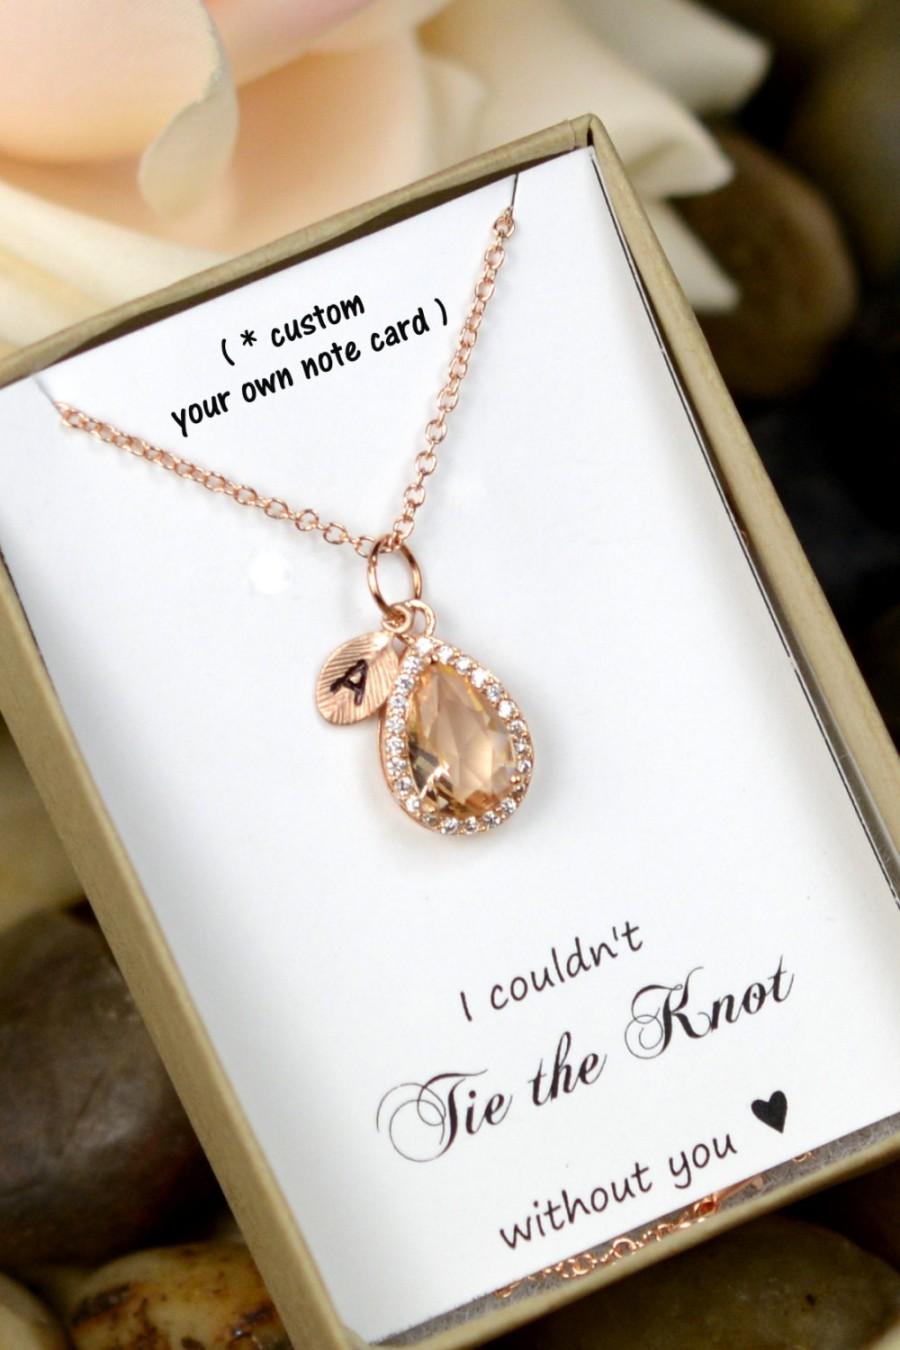 Wedding - Blush Champagne Peach Gold,Initial Necklace Jewelry Personalized Bridesmaid Gift Set Bridesmaid Necklace Bridal Jewelry Personalize Wedding